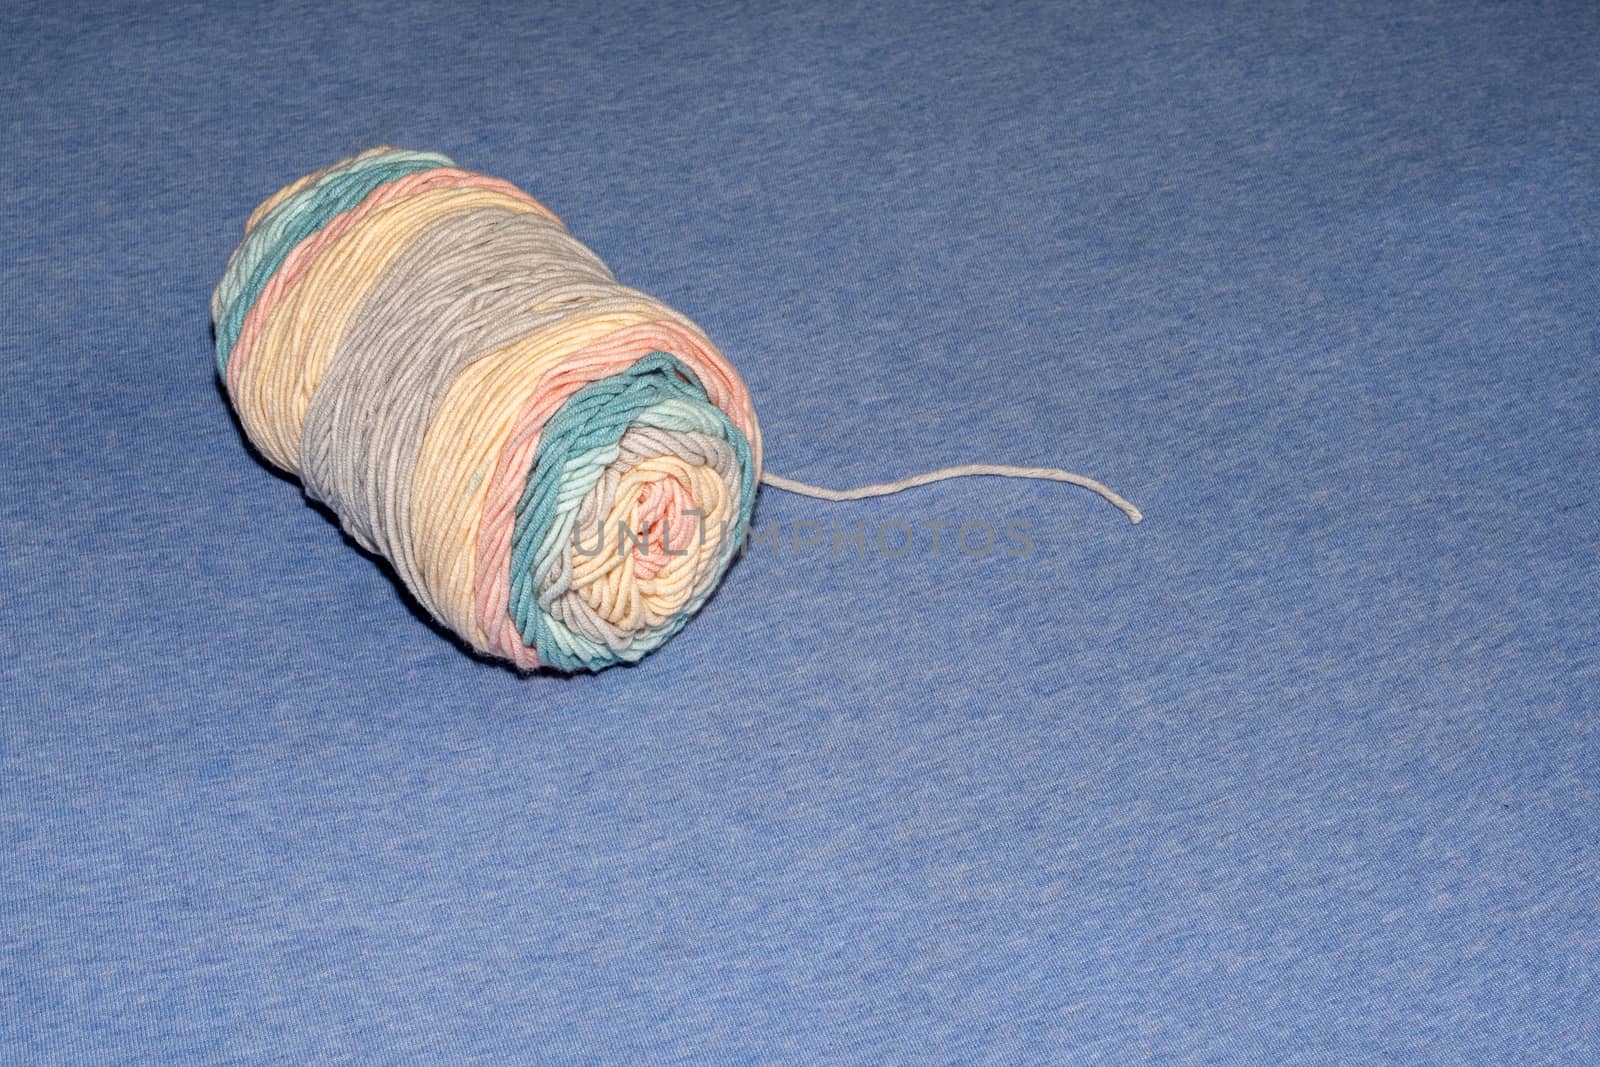 A tightly-wrapped skein of yarn has pastel blue, pink and orange colors. The yarn lies on a fabric surface, with a single thread extending outwards.